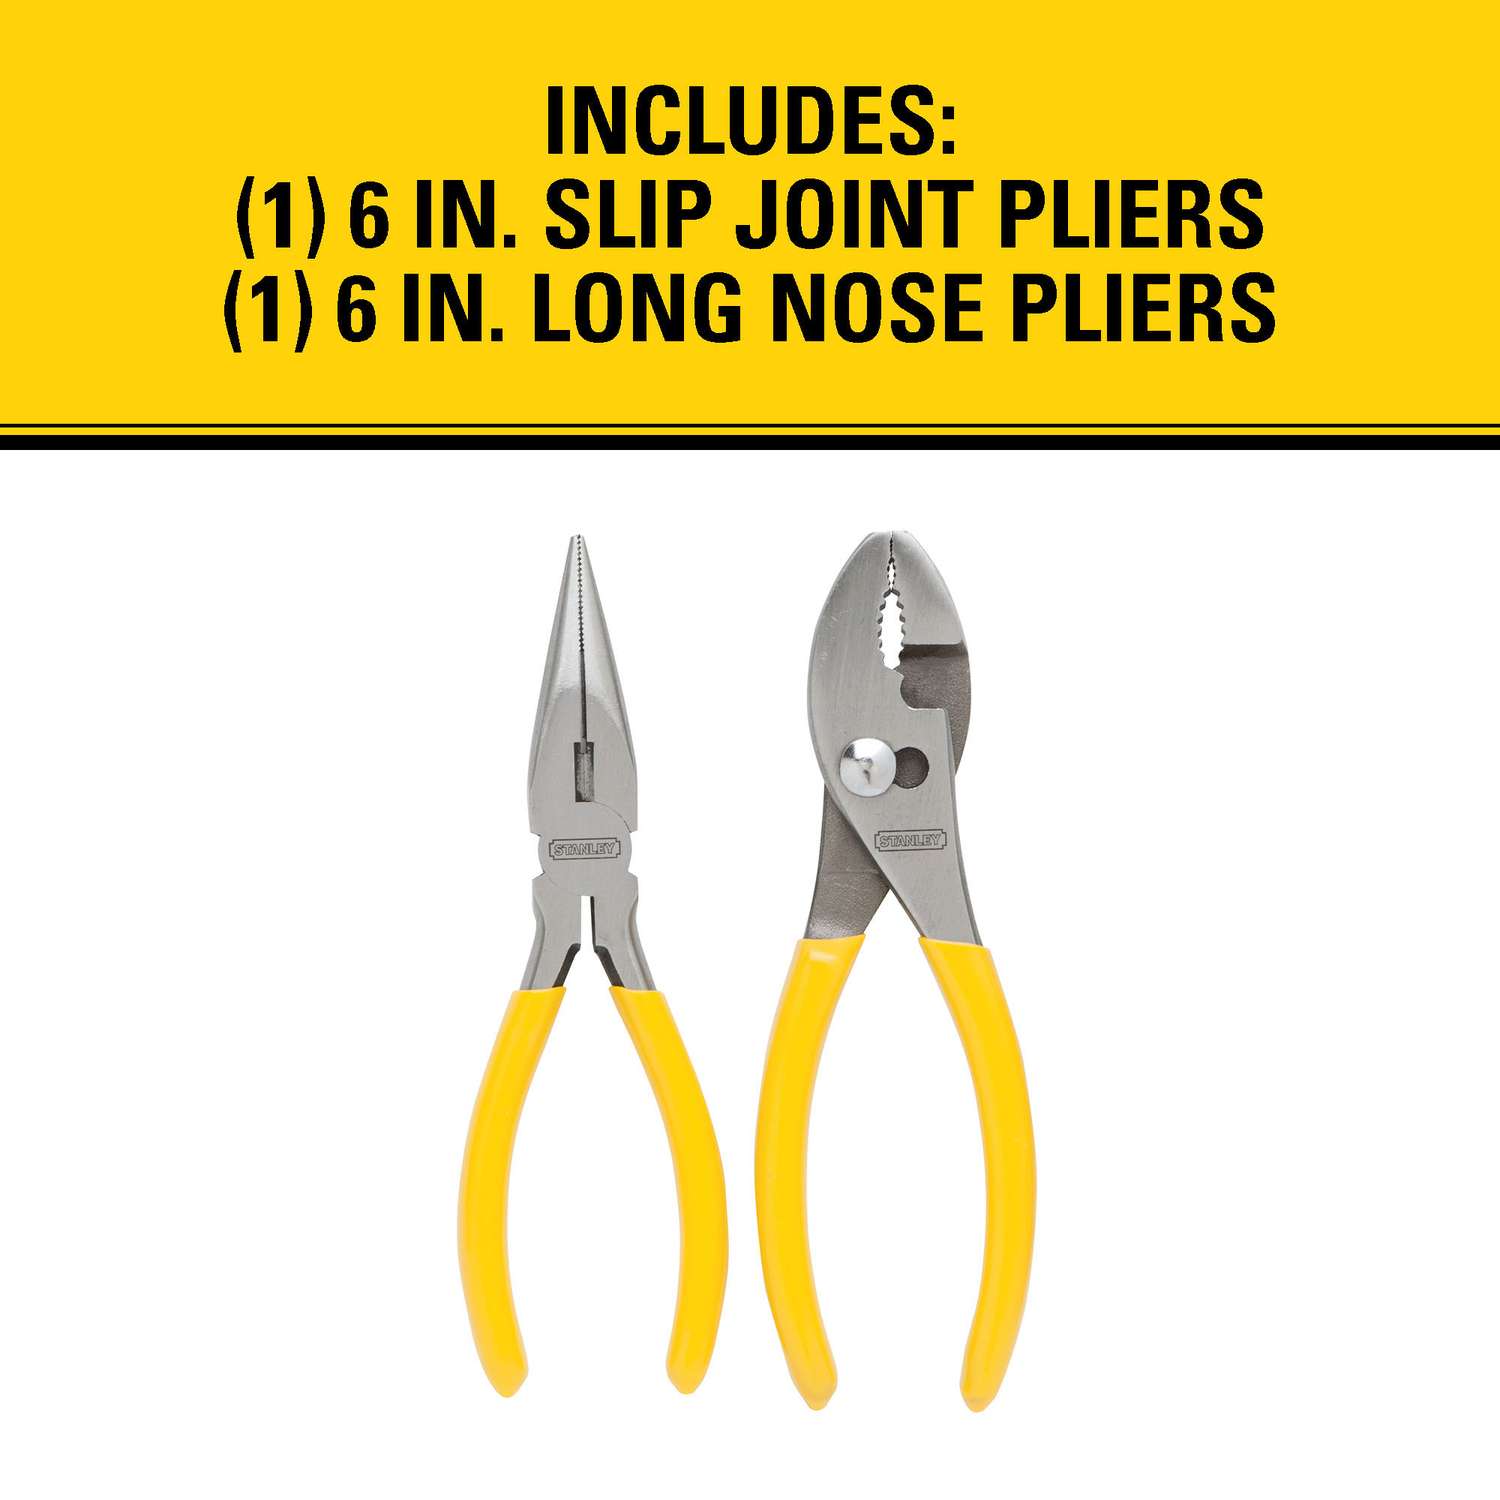 Craftsman 6 in. Drop Forged Steel Mini Needle Nose Pliers - Ace Hardware